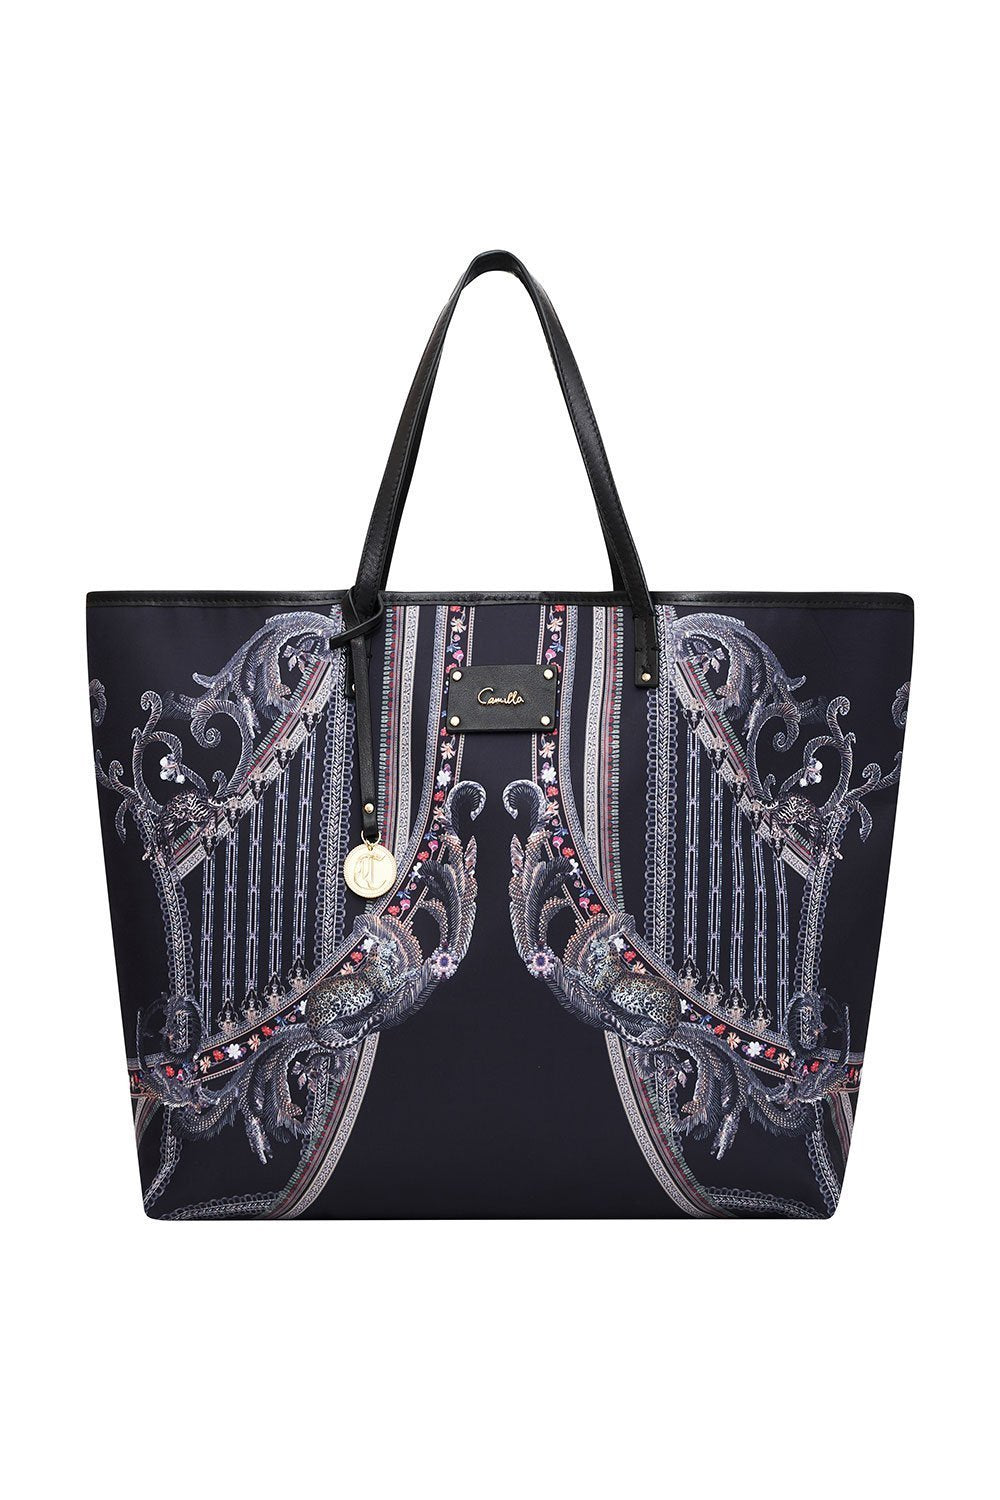 XL TOTE BELLE OF THE BAROQUE